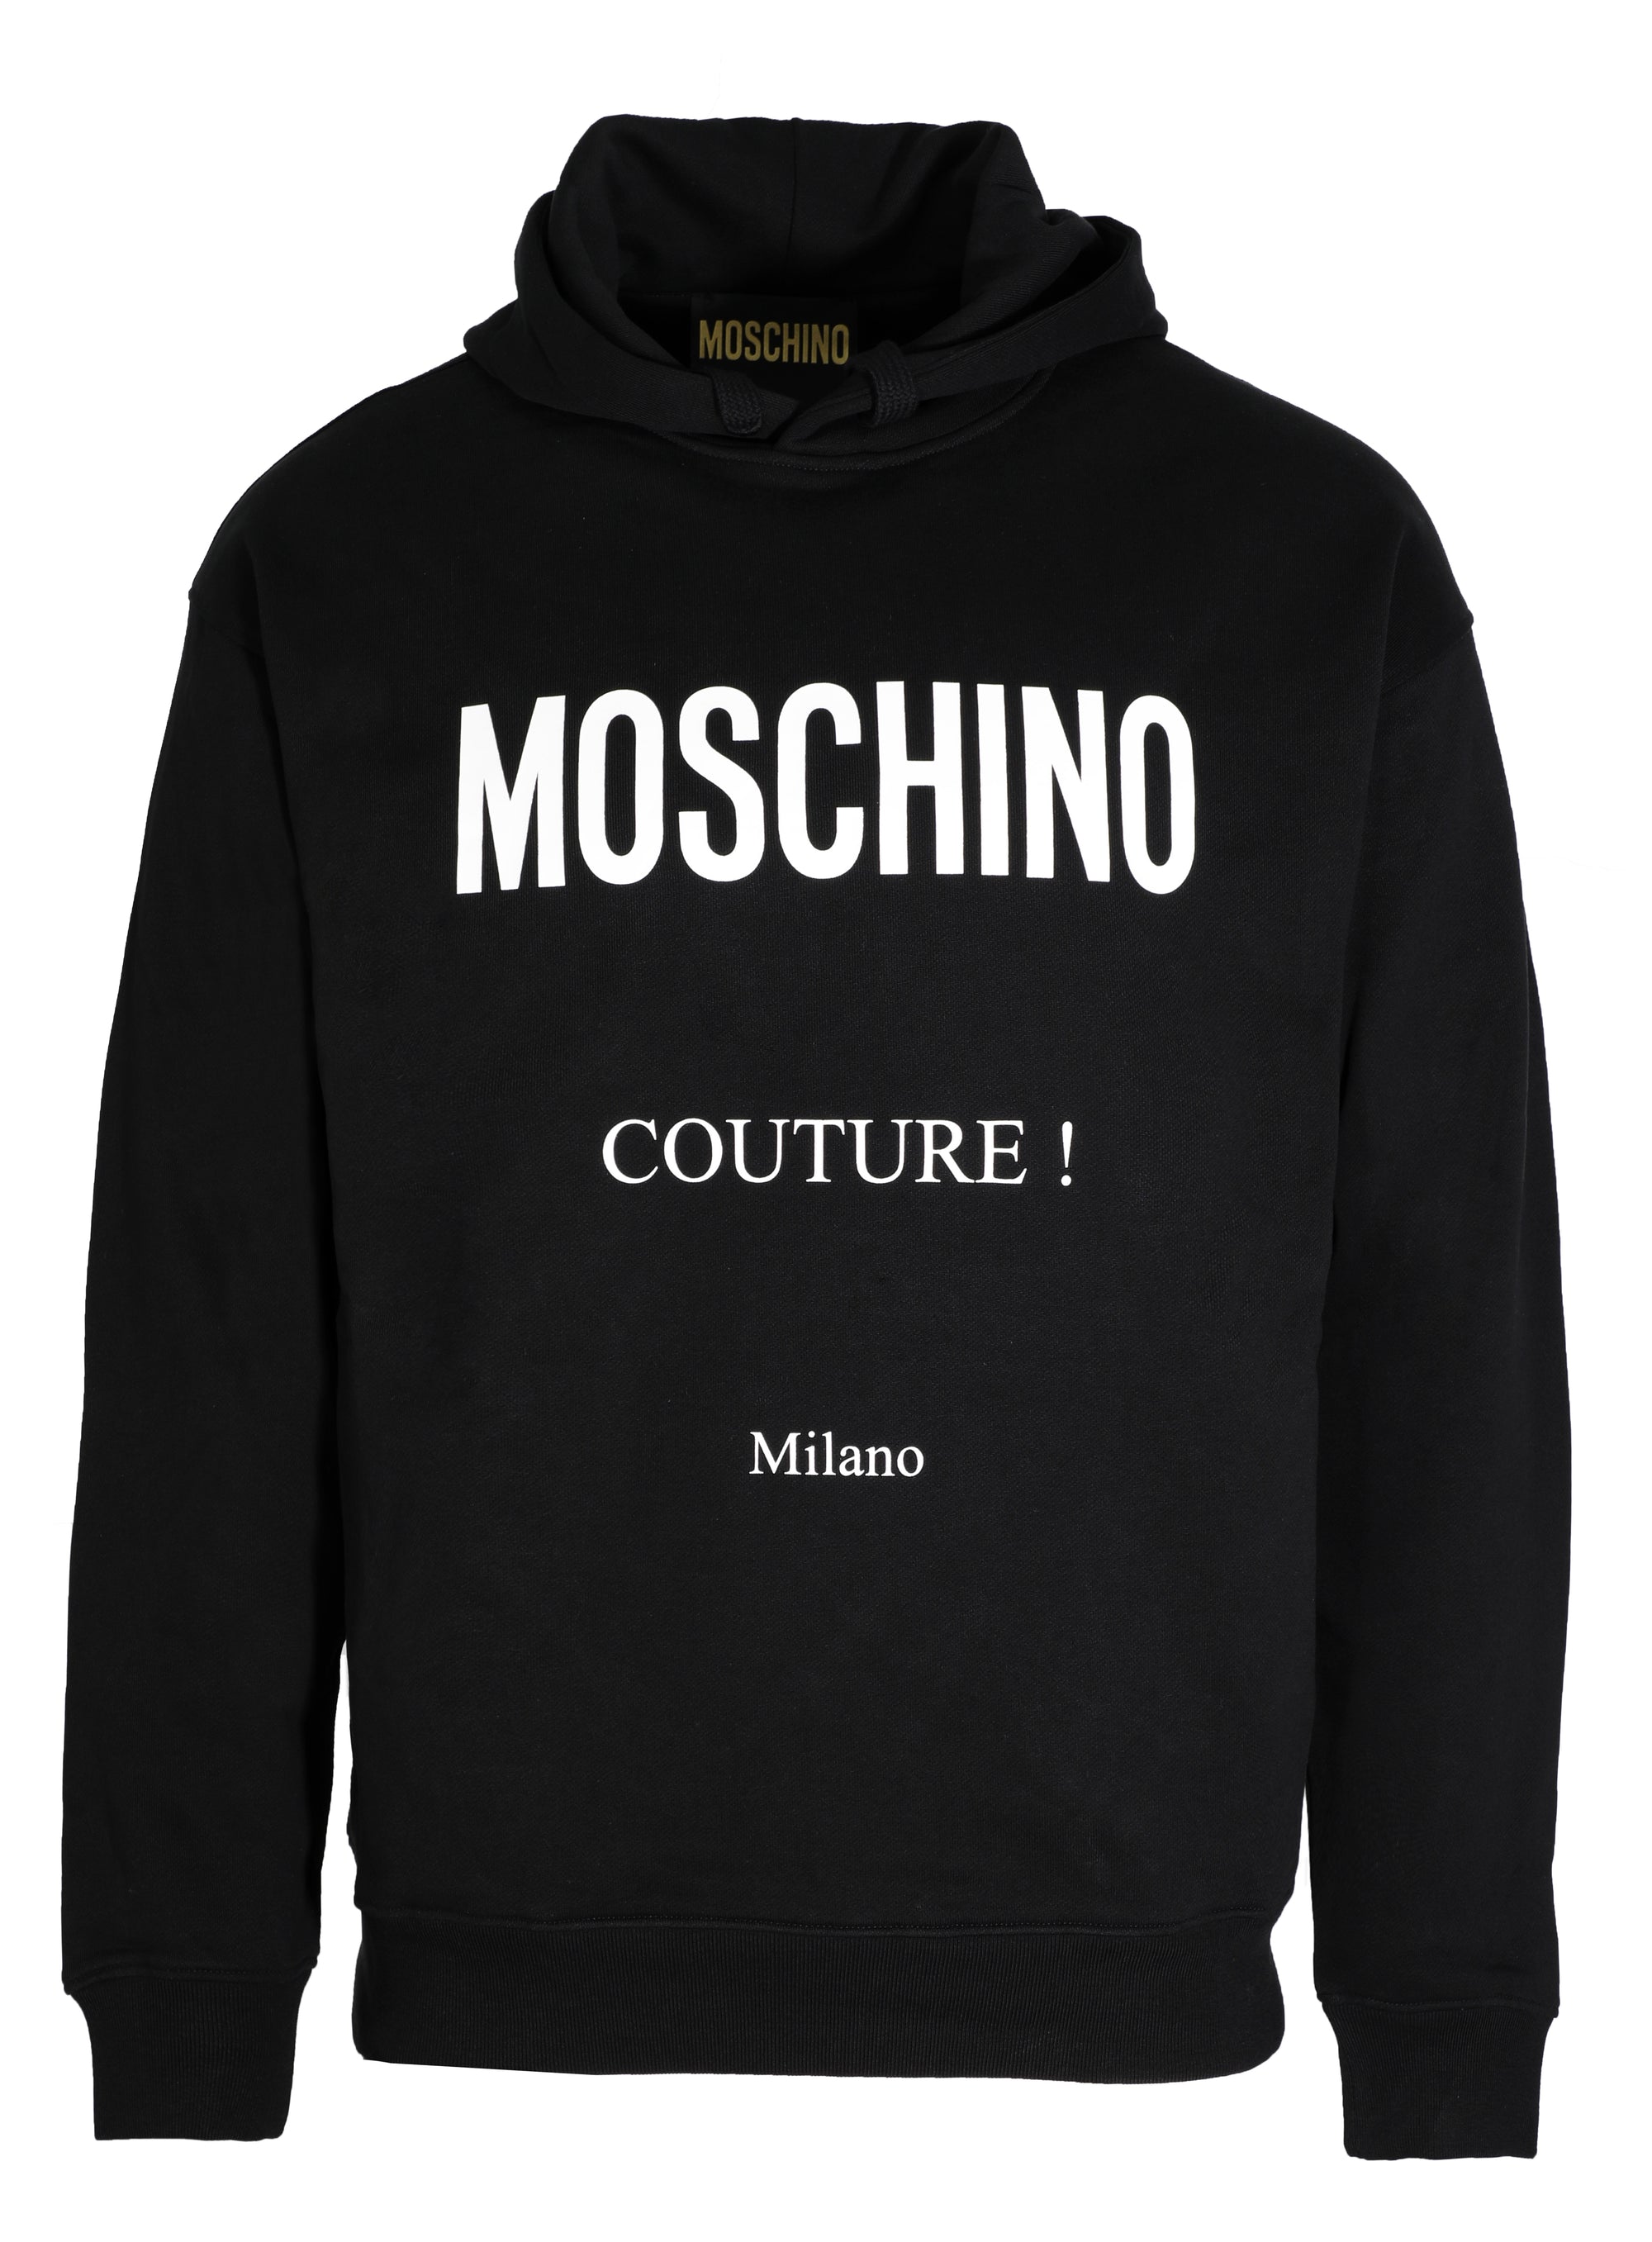 MOSCHINO COUTURE HOODIE - BLACK